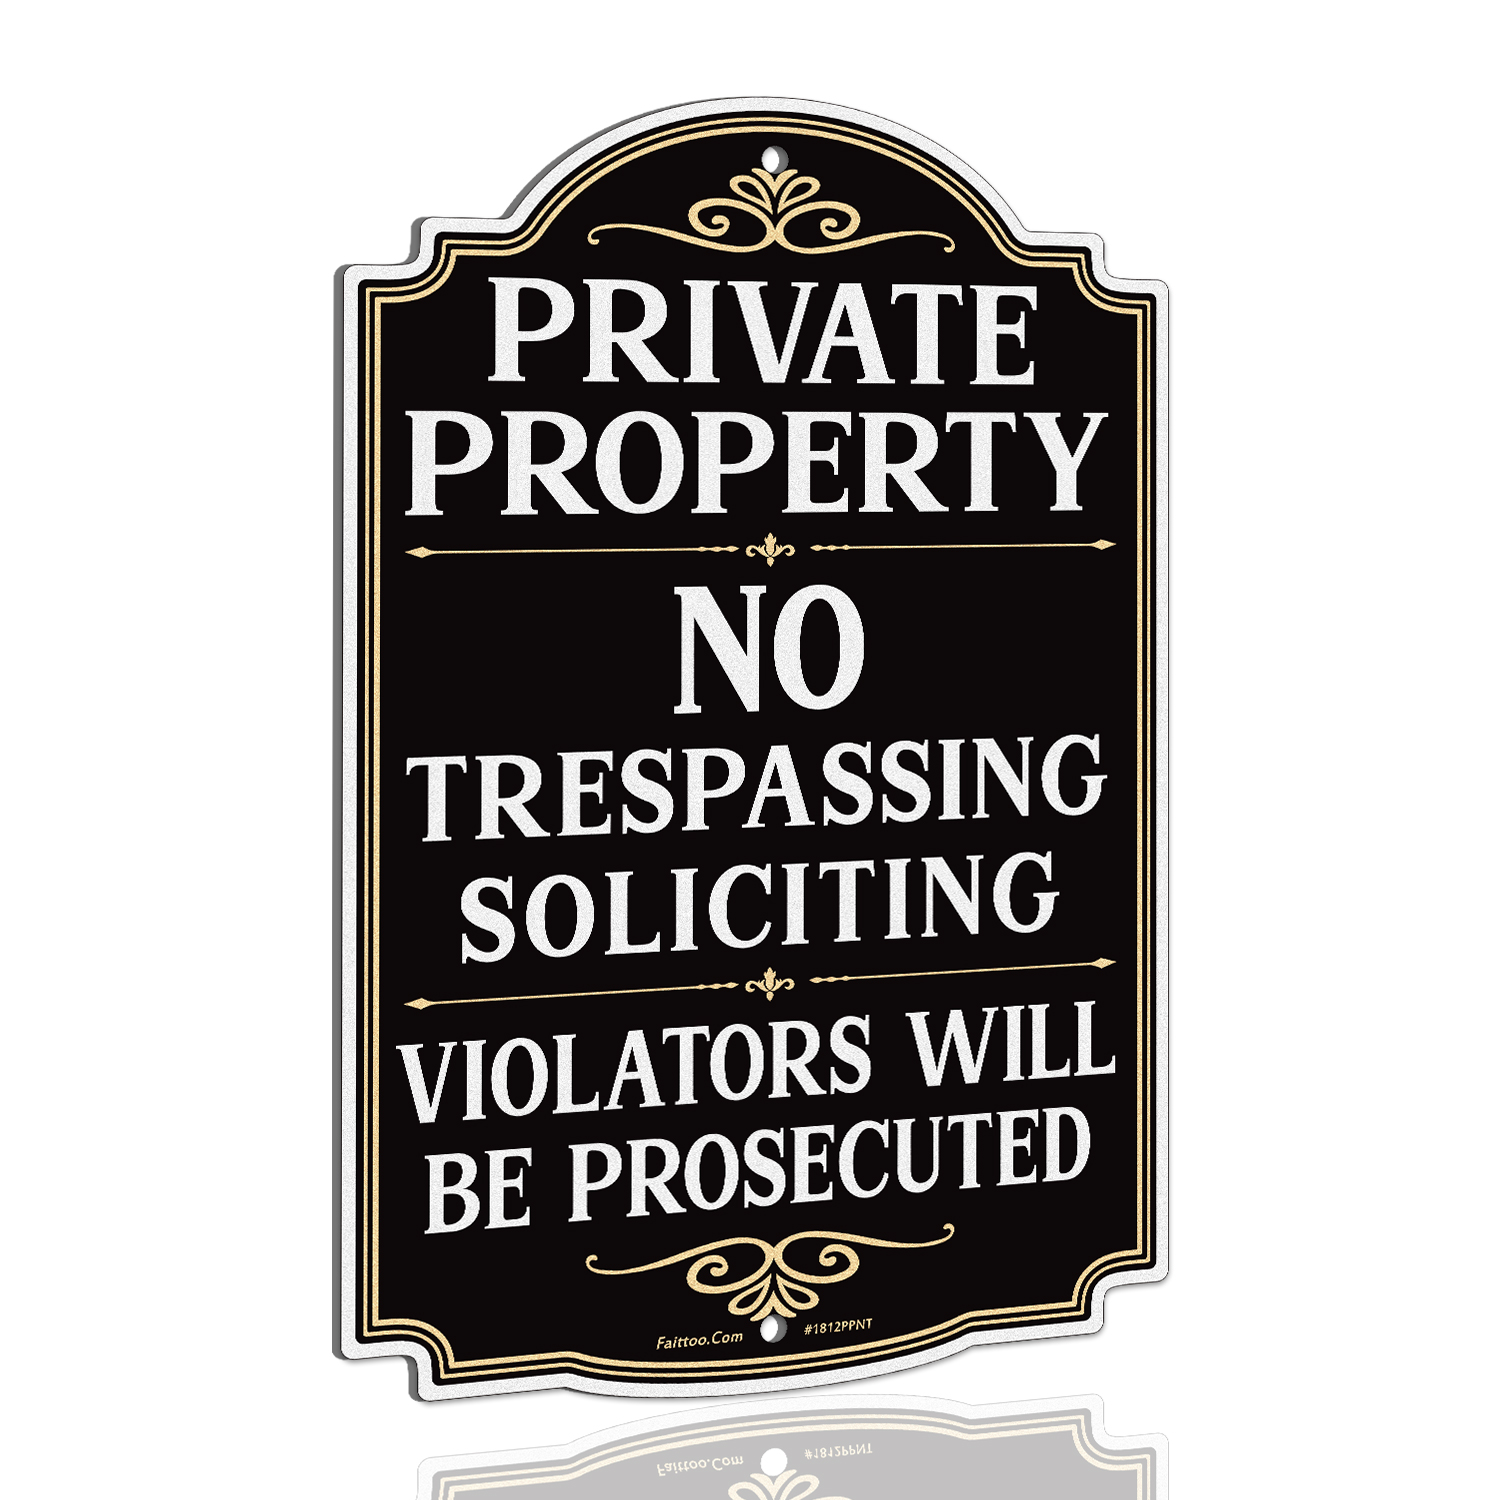 Faittoo Private Property No Trespassing Sign, Violators Will Be Prosecuted, 17.5 x 11.6 Inch Reflective Aluminum Warning Sign, UV Protected, Weather/Fade Resistant, Easy to Install